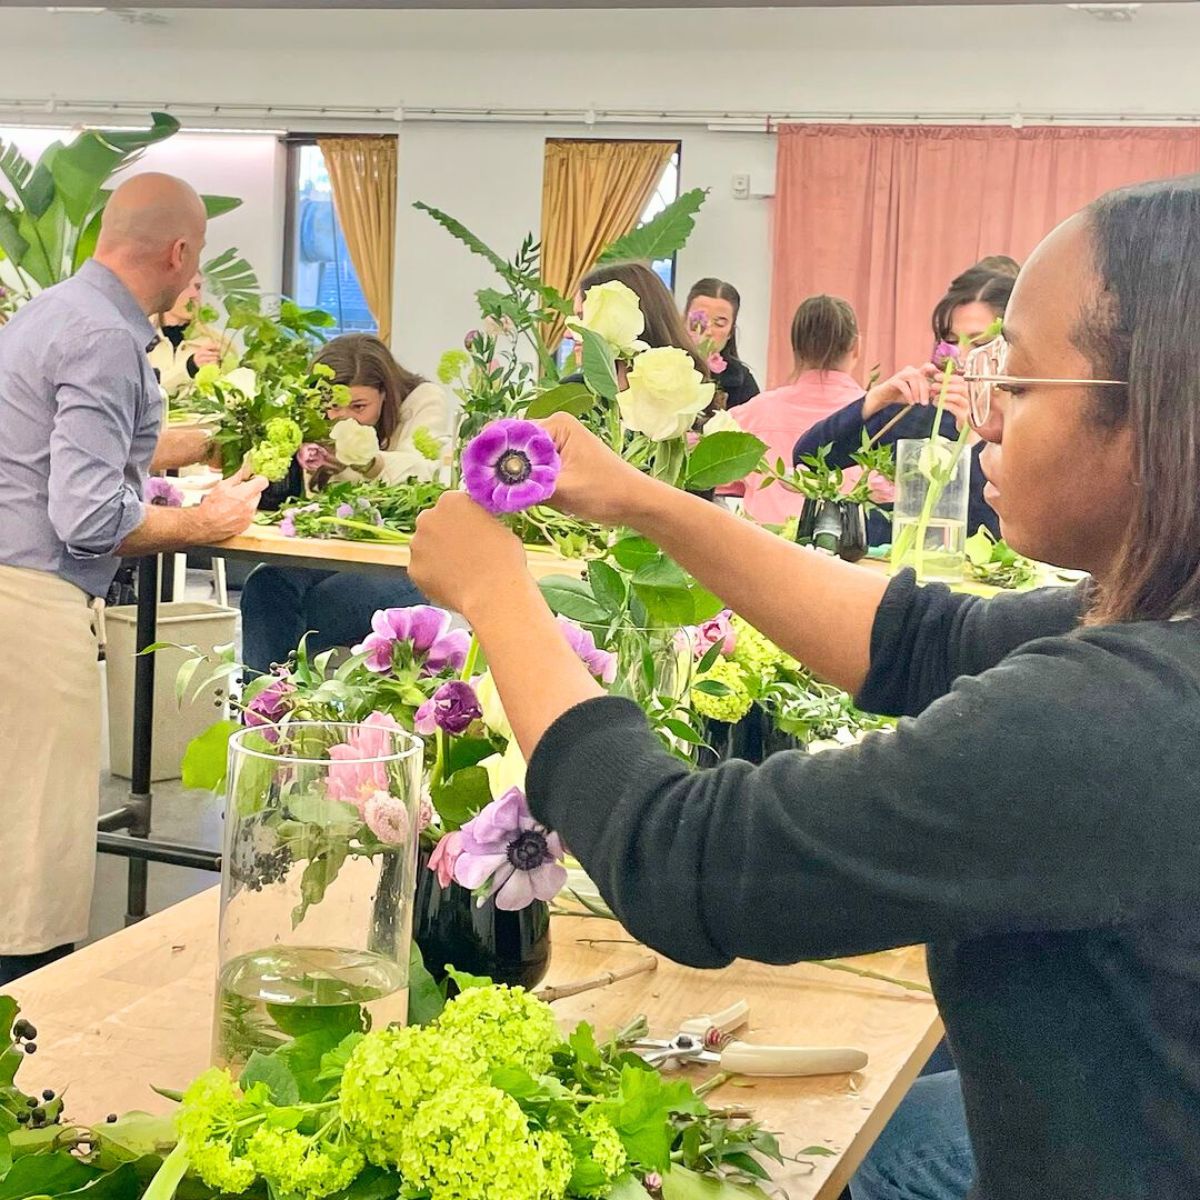 The FlowerSchool New York - A Place to Start Your Journey - Article onTh...